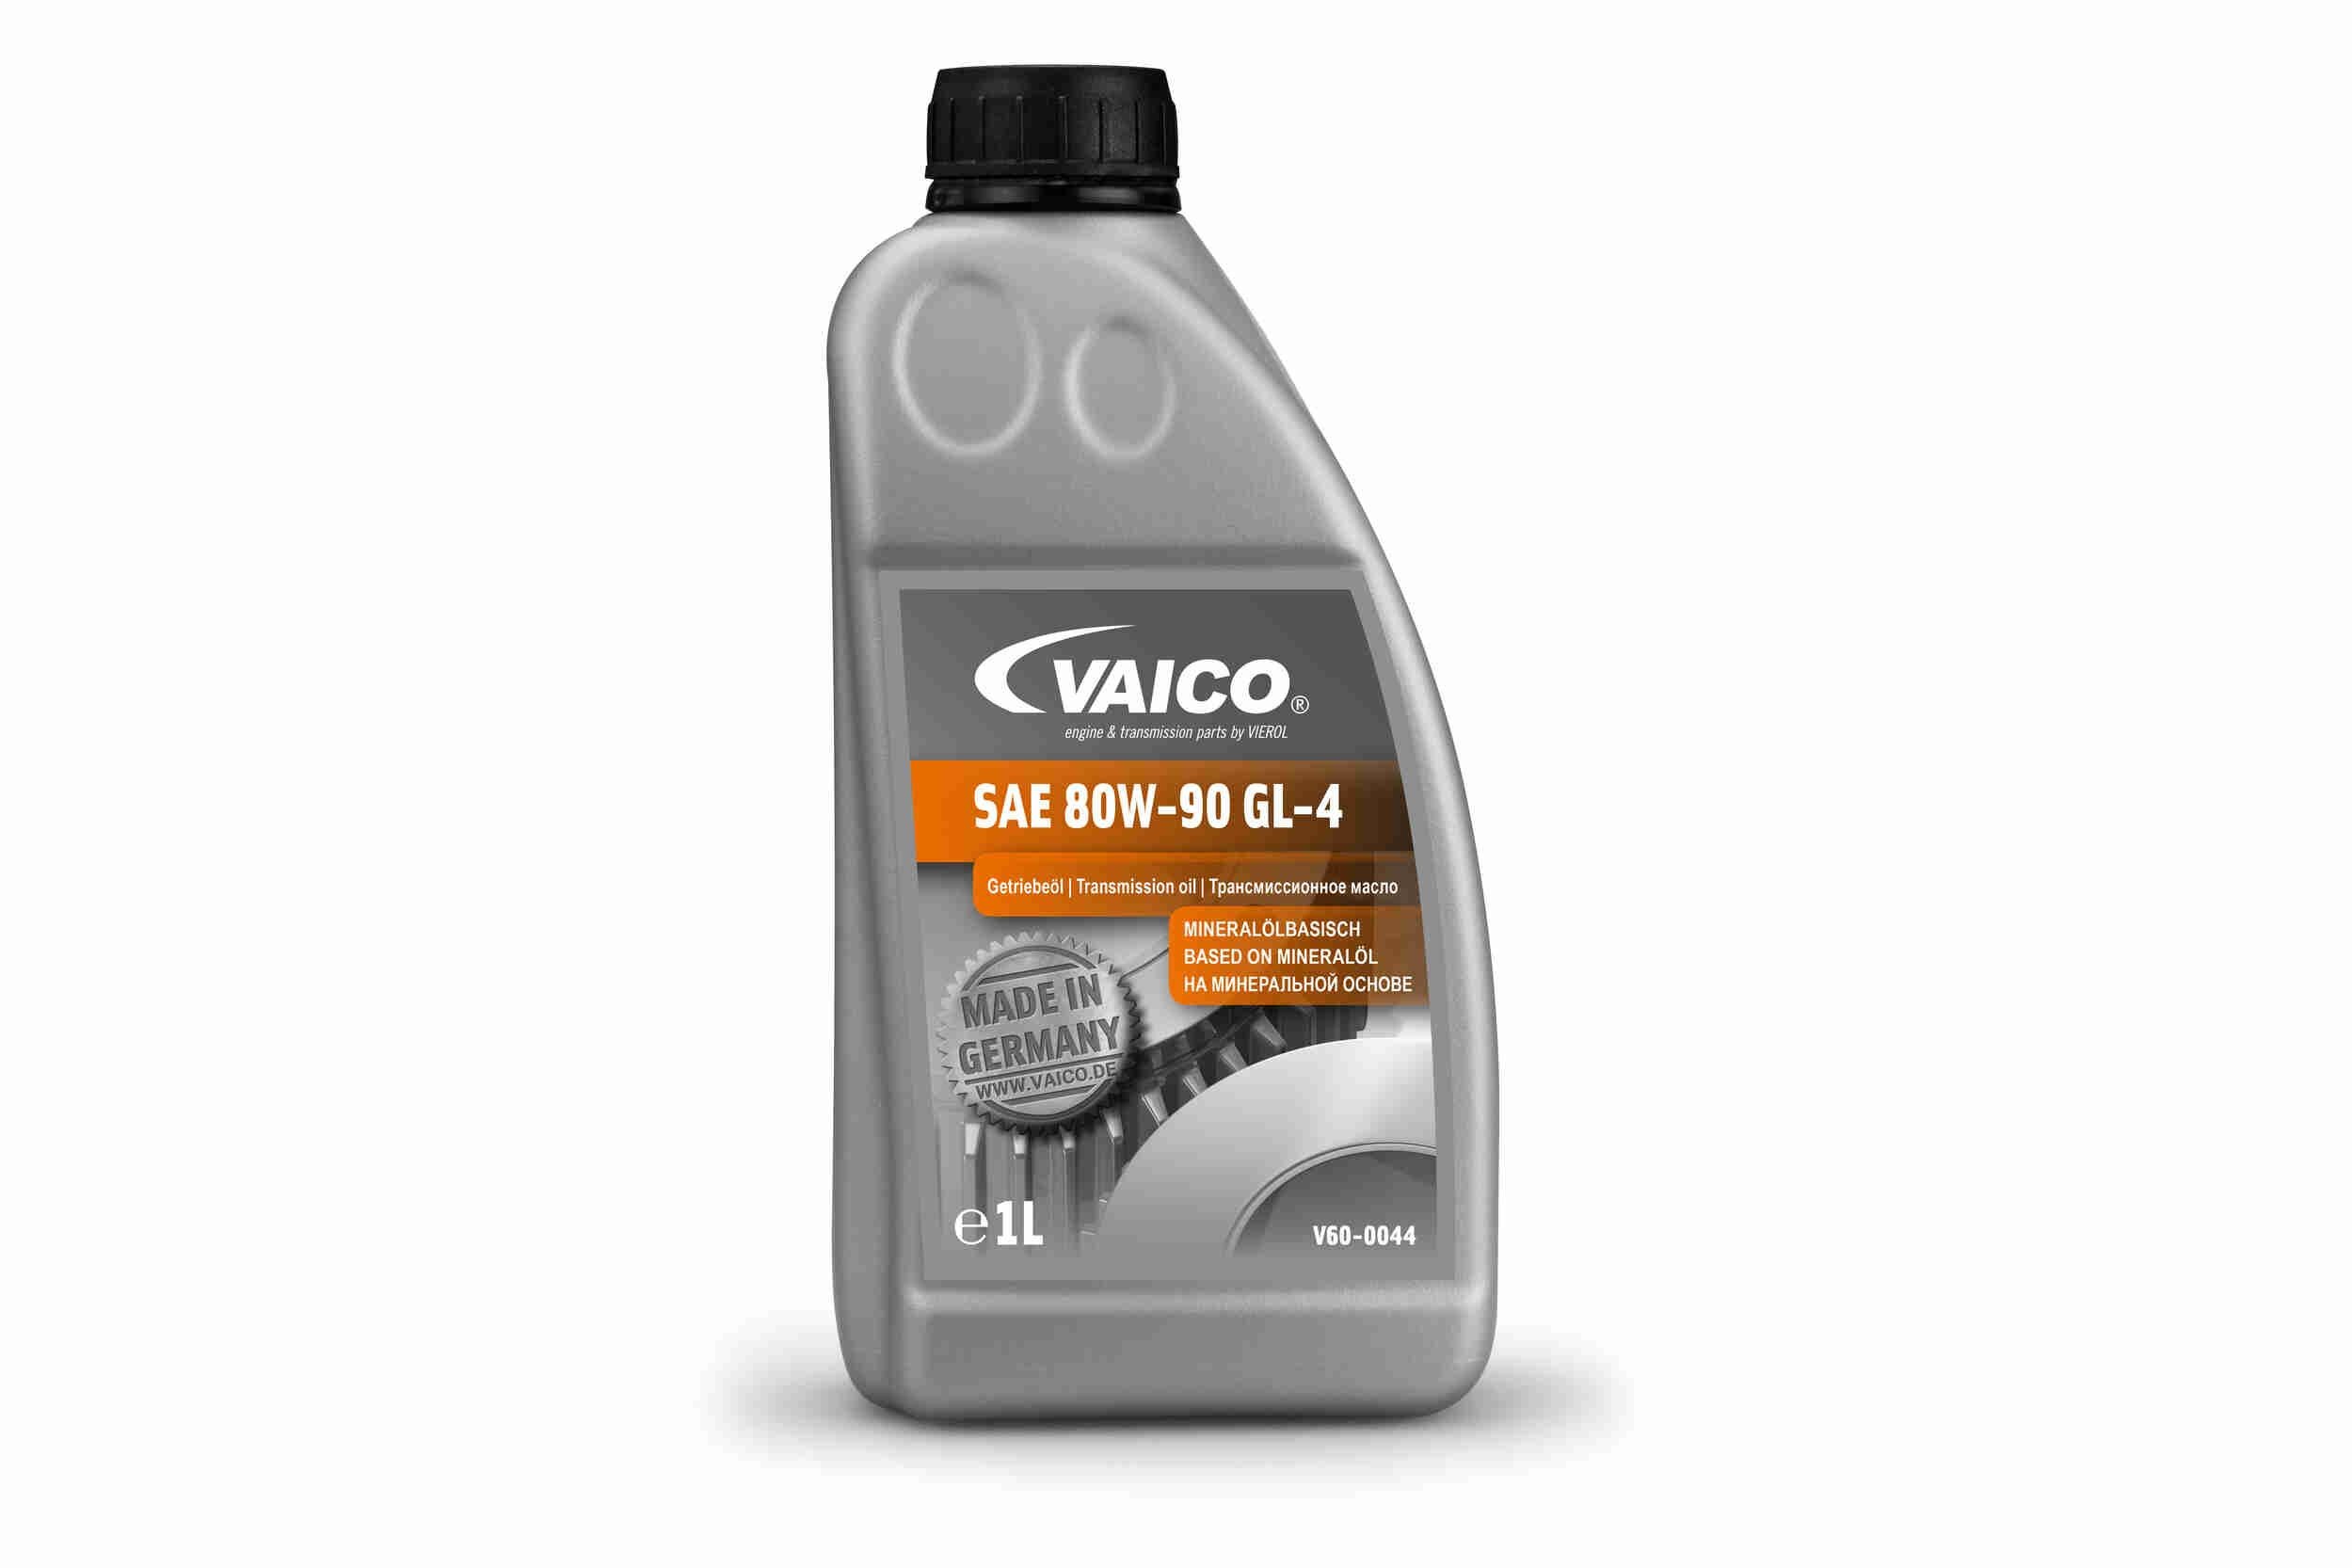 VAICO V60-0044 Manual Transmission Oil Capacity: 1l, 80W-90, Q+, original equipment manufacturer quality MADE IN GERMANY